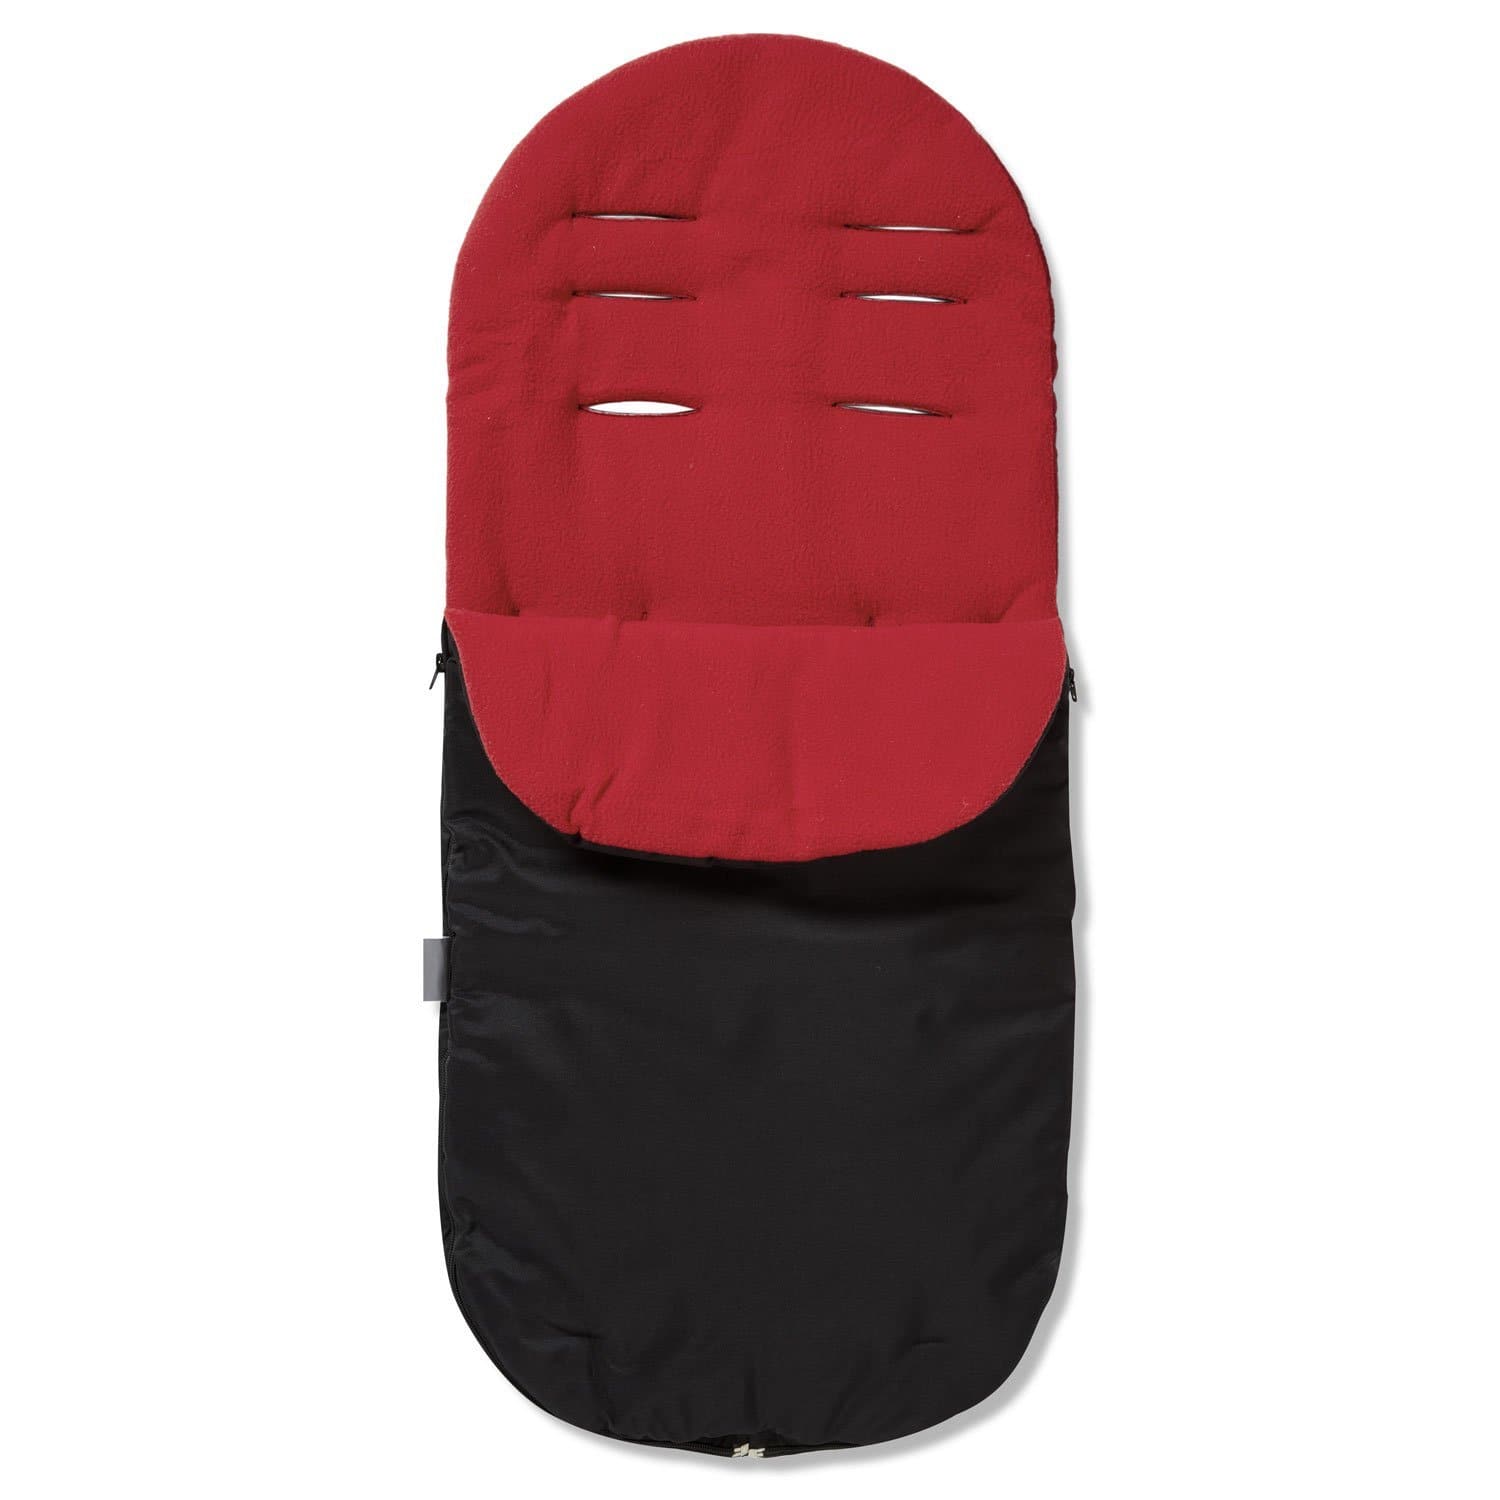 Footmuff / Cosy Toes Compatible with Peg Perego - Red / Fits All Models | For Your Little One